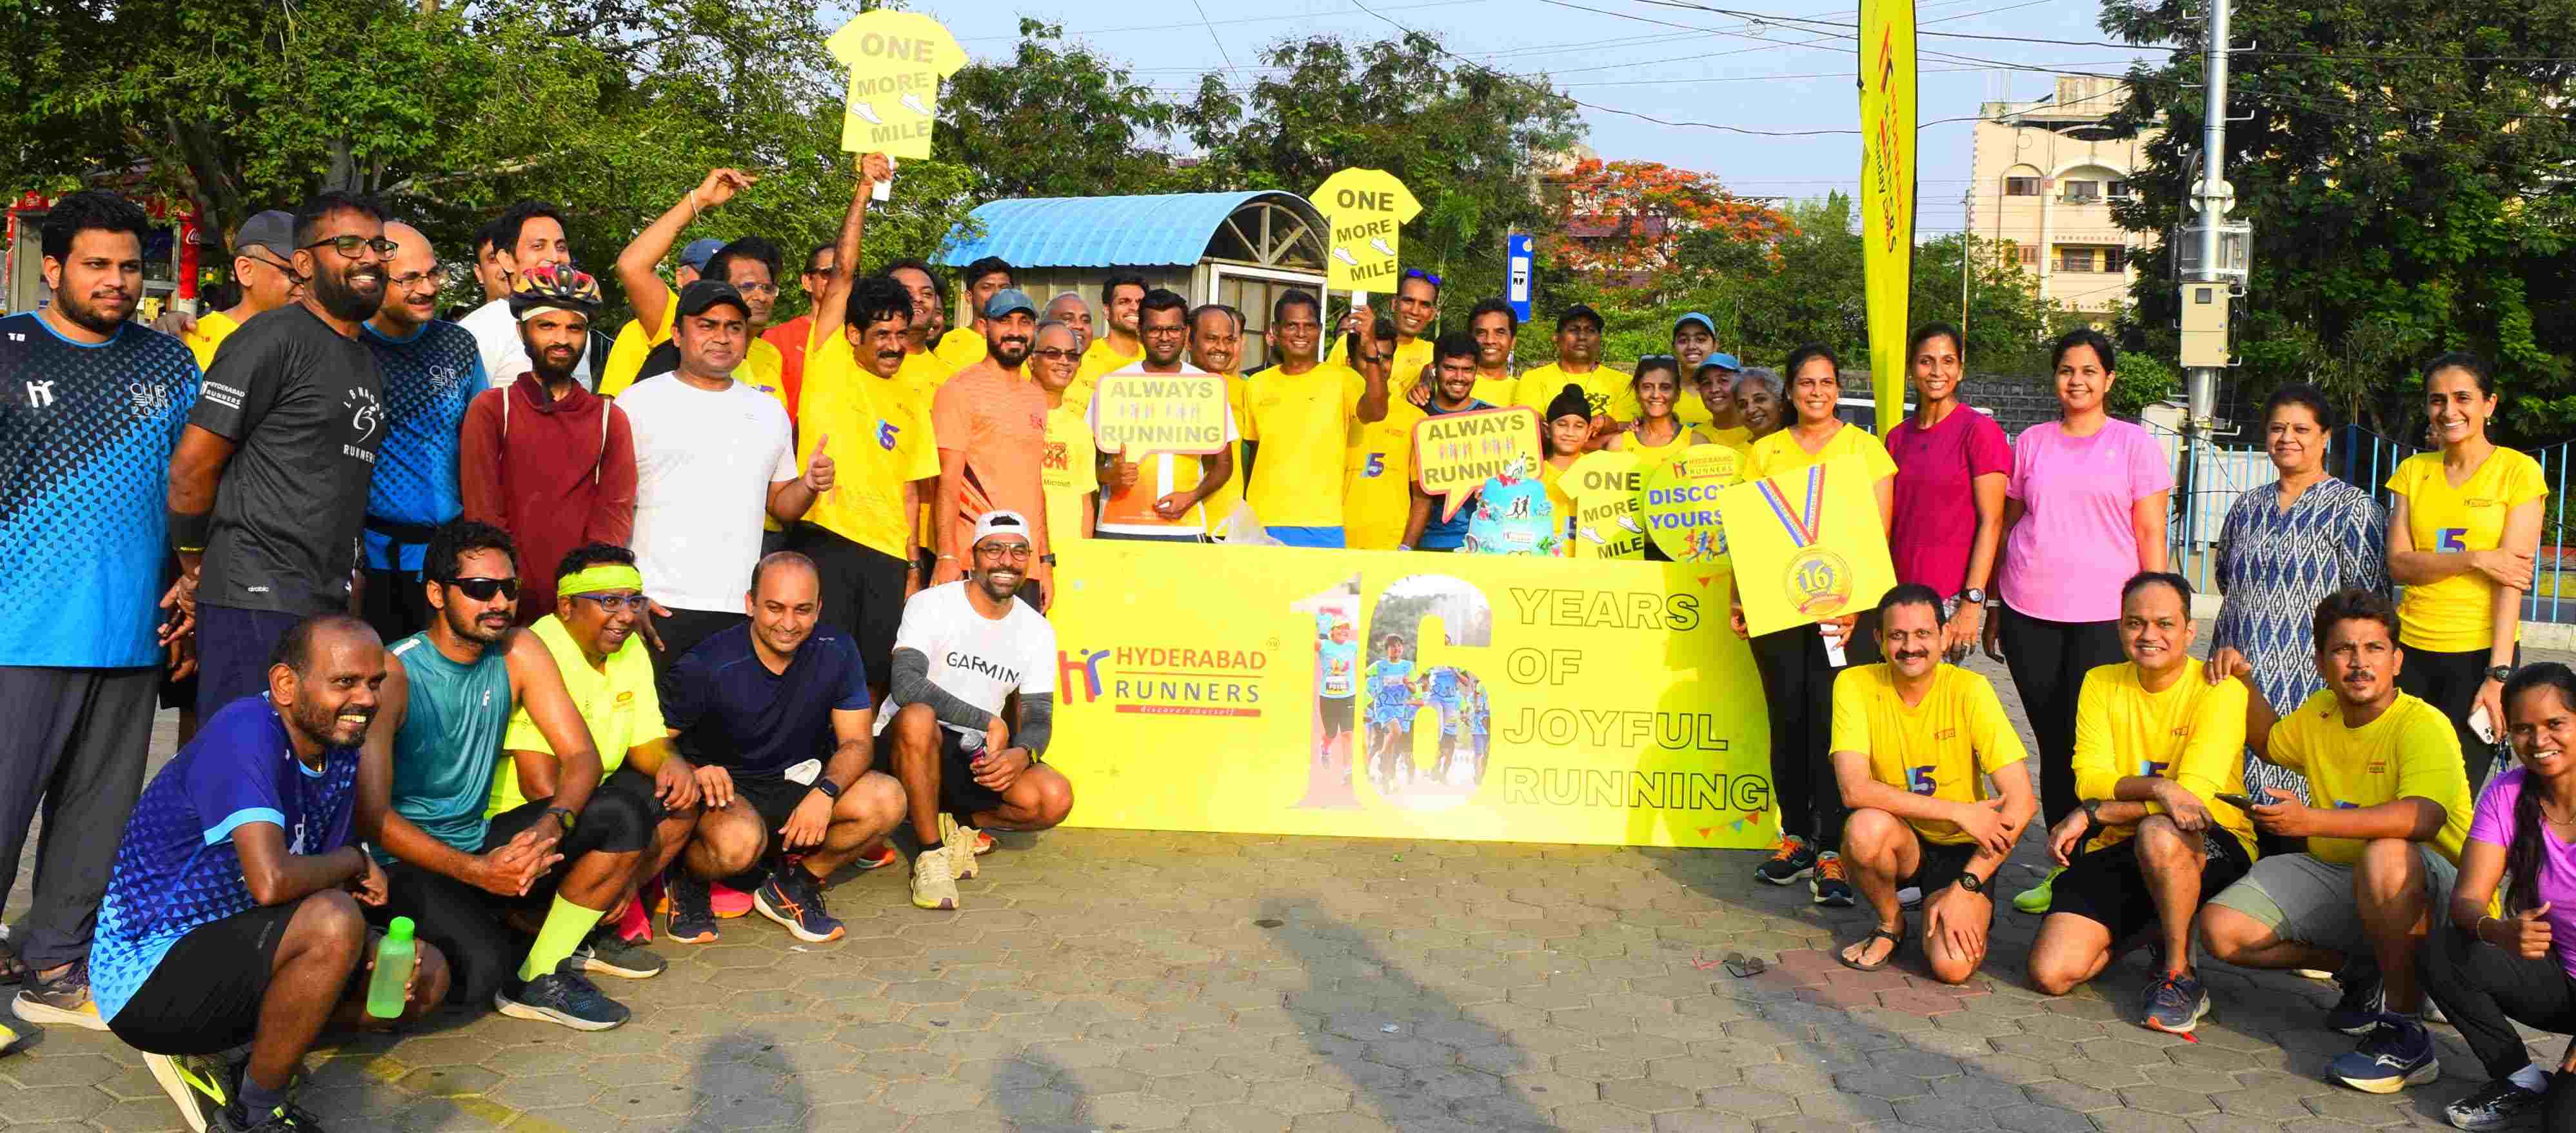 Hyderabad Runners Society celebrates its 16th Anniversary It impacts 15000 runners a year